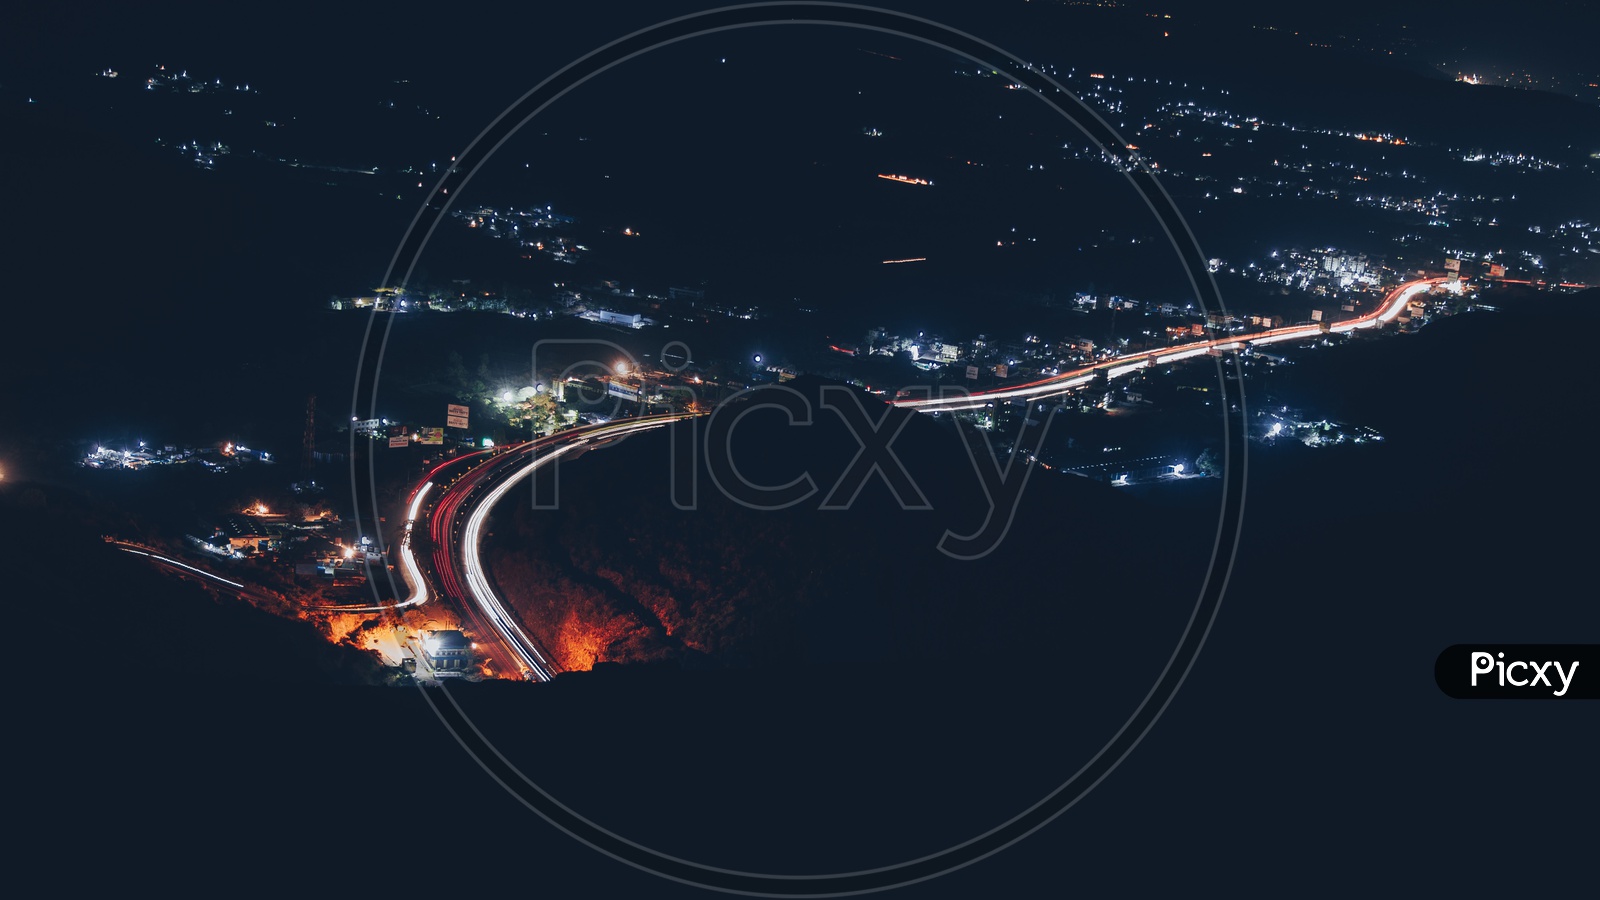 view of Pune city at night from above the Katraj Tunnel and was clicked during famous, popular trek, K2S (Katraj-to-Sinhagad).